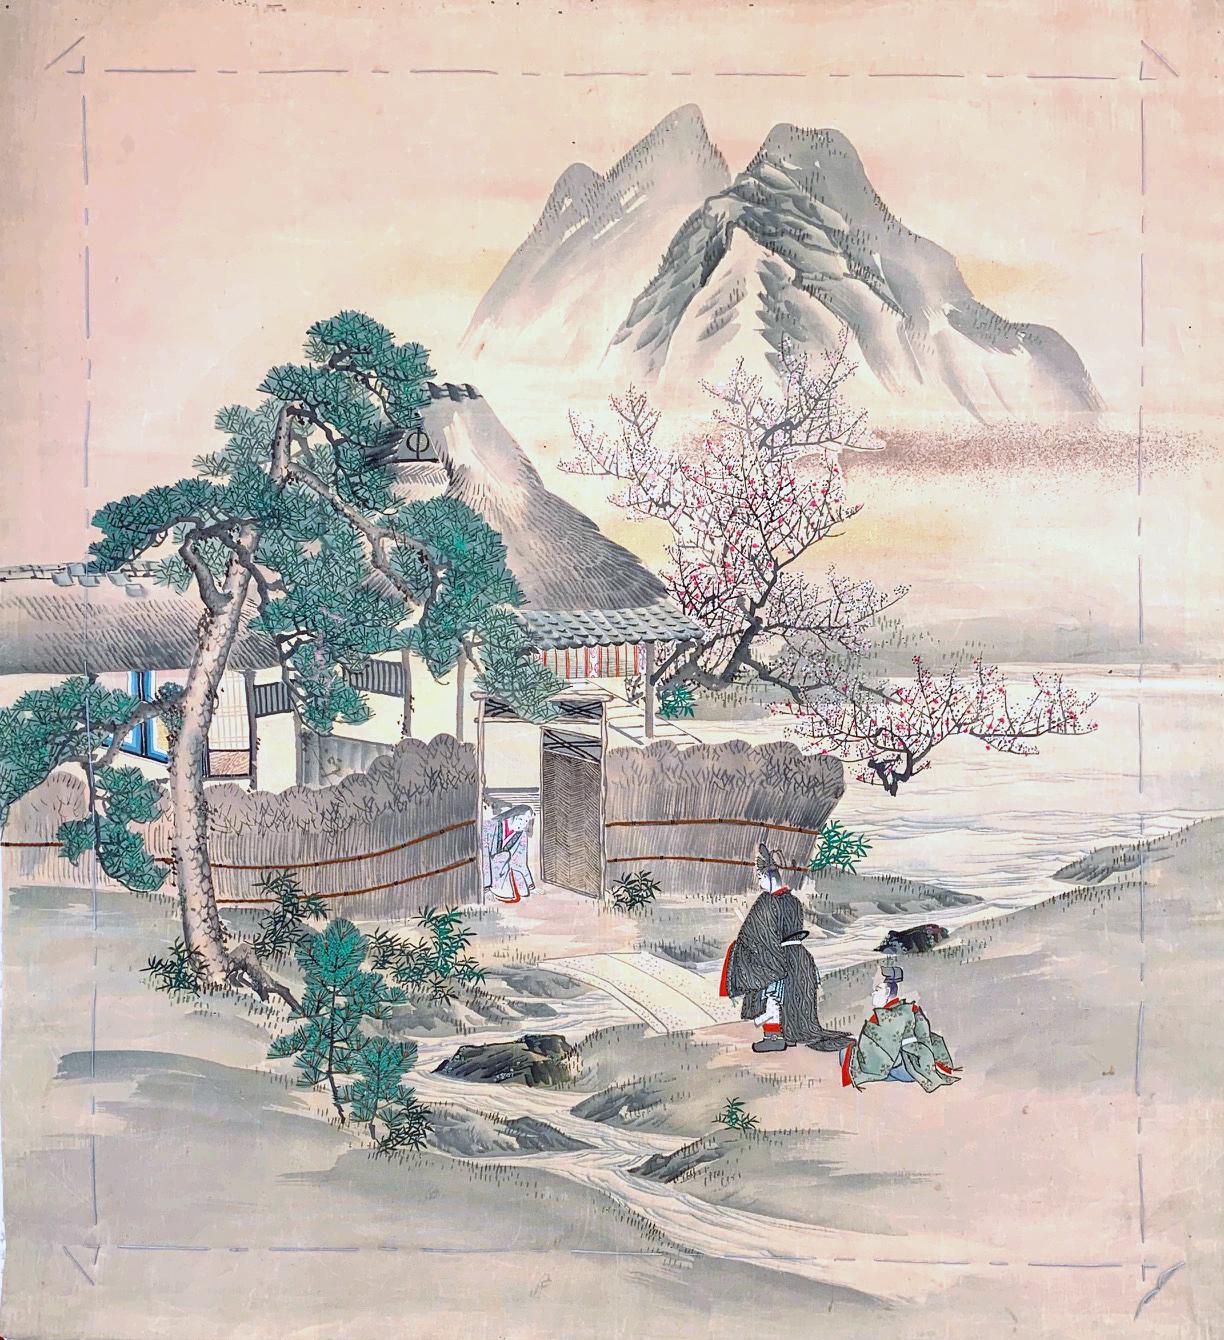 A Japanese silk Fukusa panel circa late 19th-early 20th century of Meiji Period. The front was beautifully decorated with Yuzen-zome, a labor intensive resist-dye technique invested by an artist monk Miyazaki Yuzensai (1654 -1736) of Edo period. The